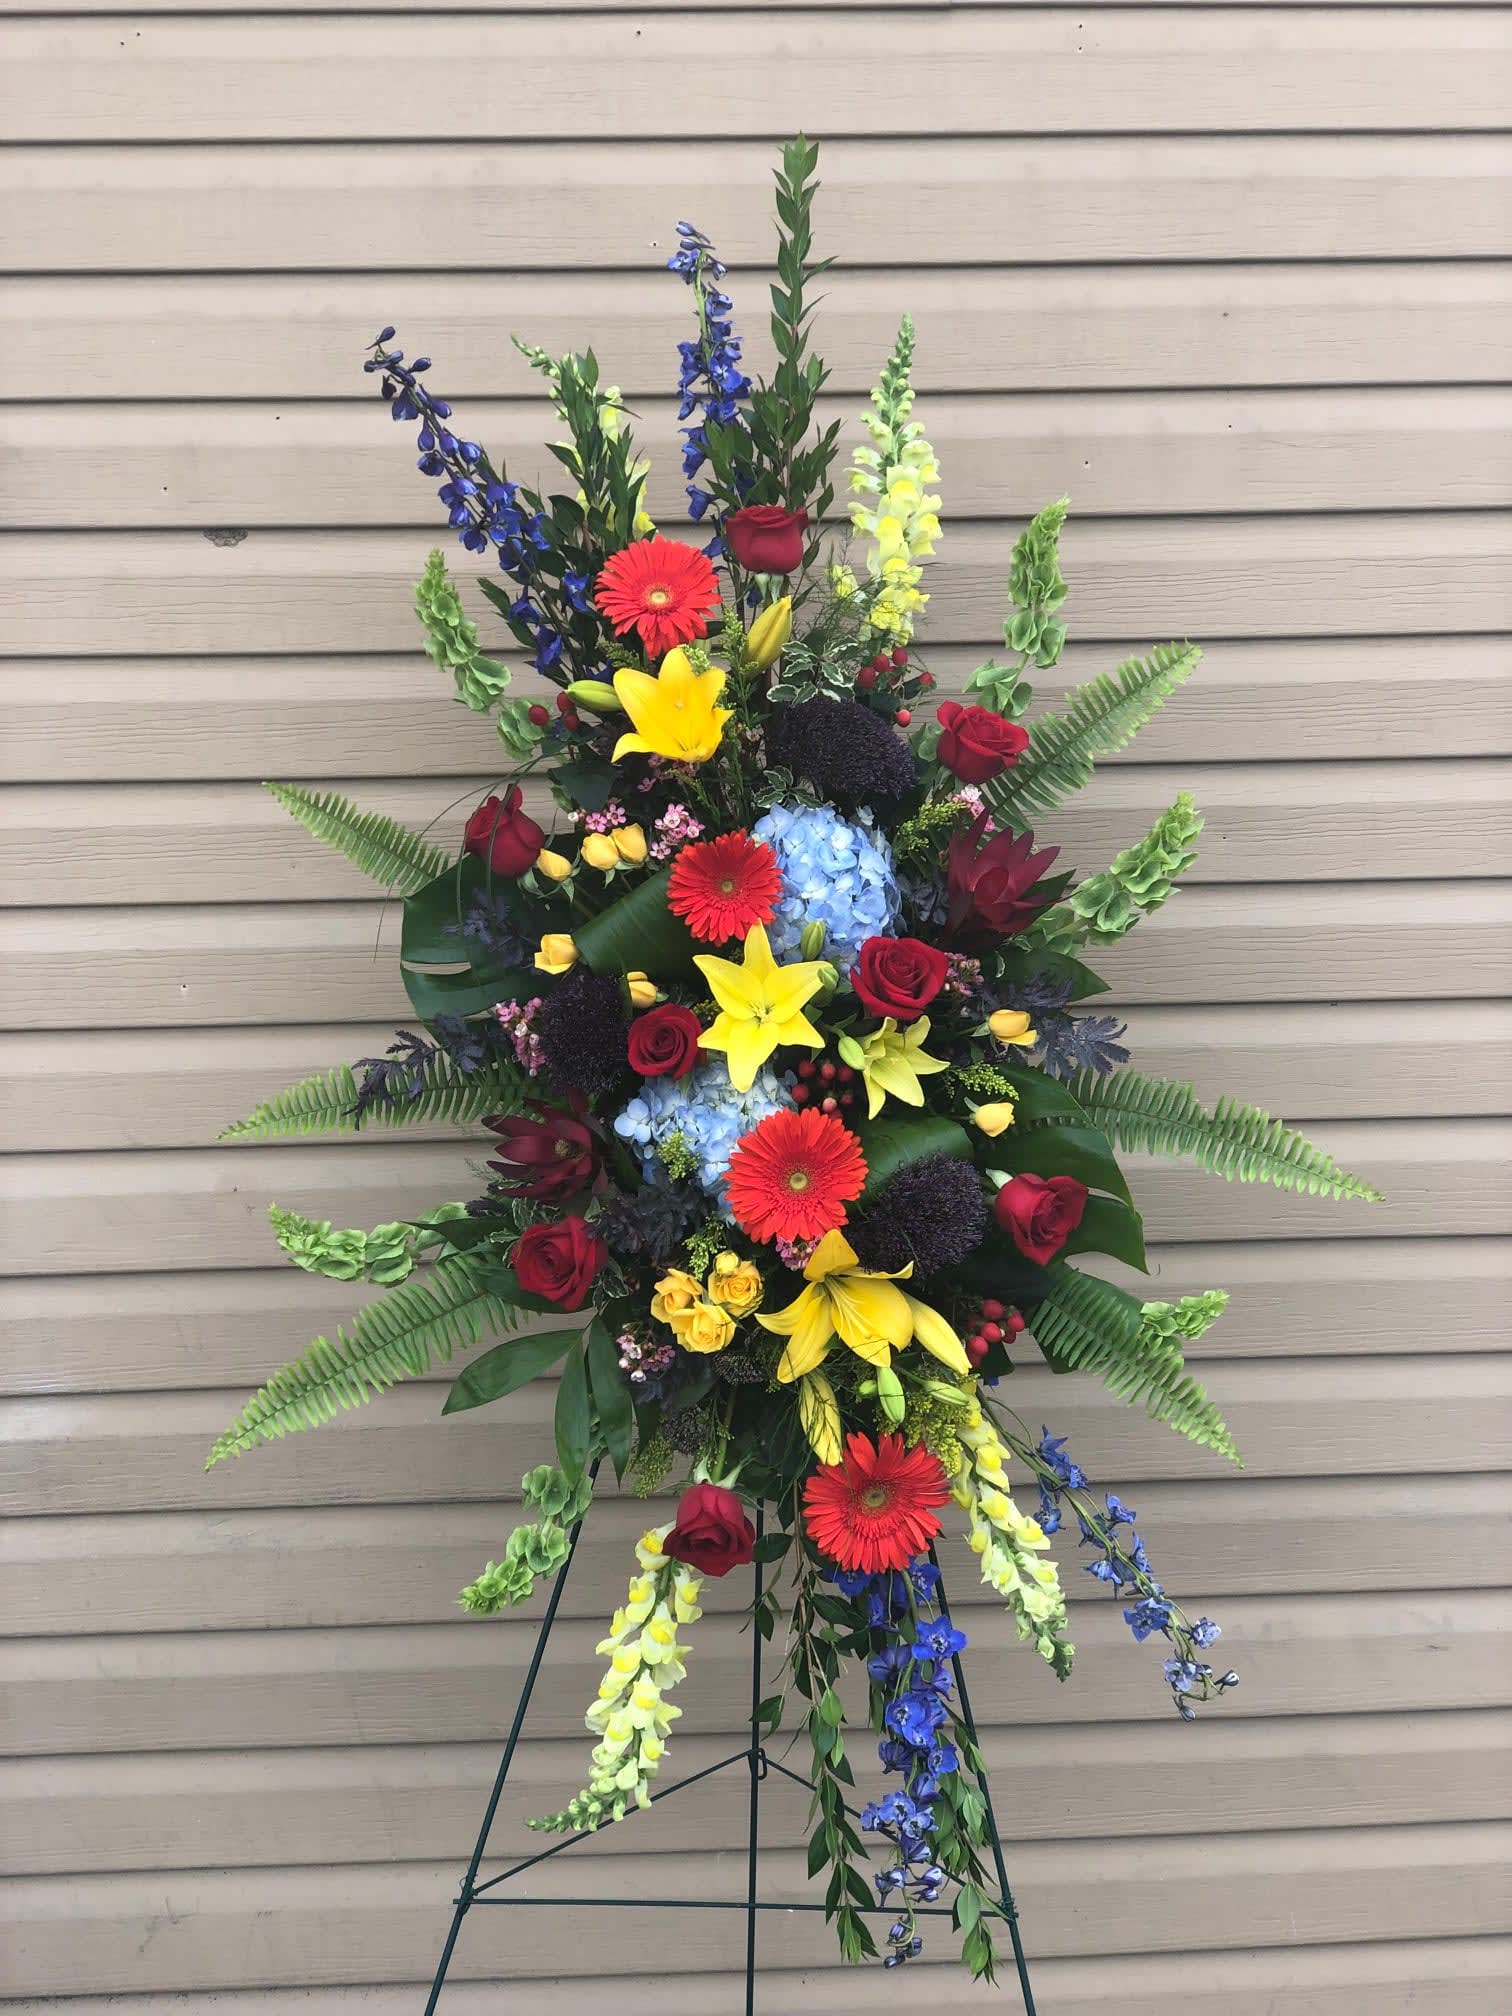 Strong Together Spray - Mixture of gerber daisies, roses, snap dragons, delphinium, lilies, bells of Ireland, spray roses, hydrangeas and assorted greens arranged together to create this bright and bold summer spray.  Flowers and colors may vary depending on availability.